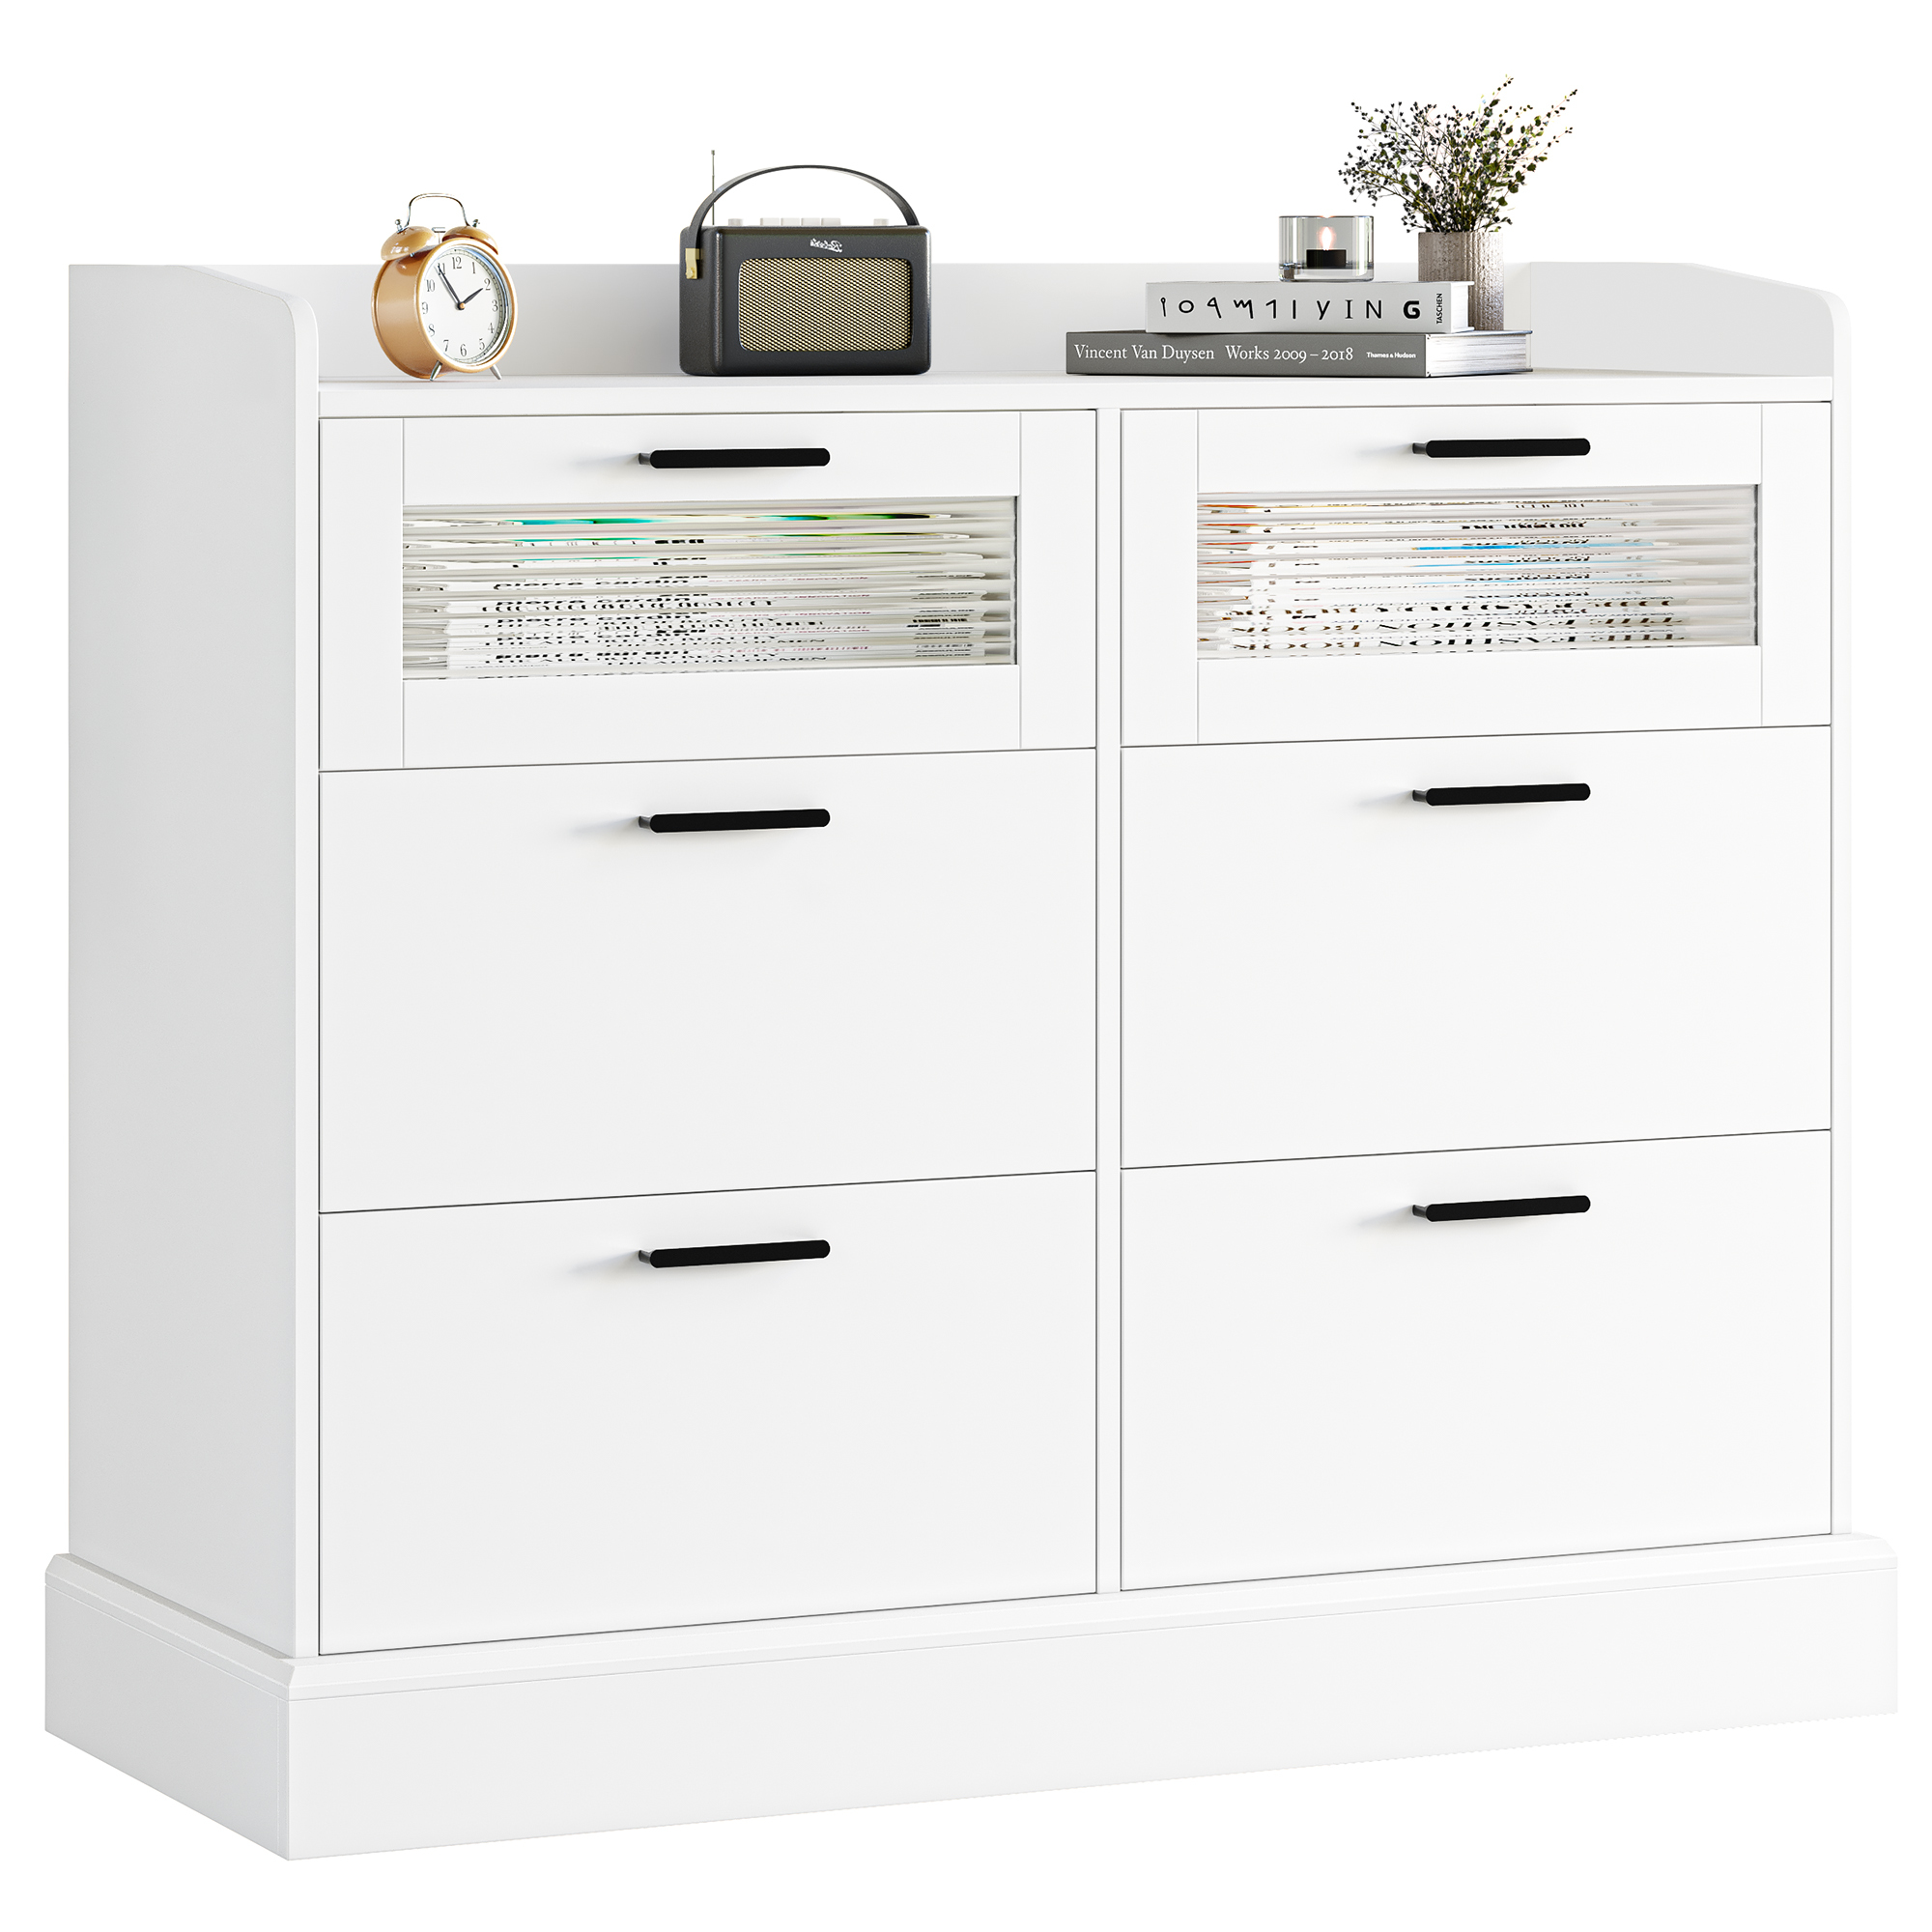 Homfa 6 Drawer Horizontal Dresser with Fence, White Chest Dresser with Glass Drawer for Bedroom - image 4 of 5